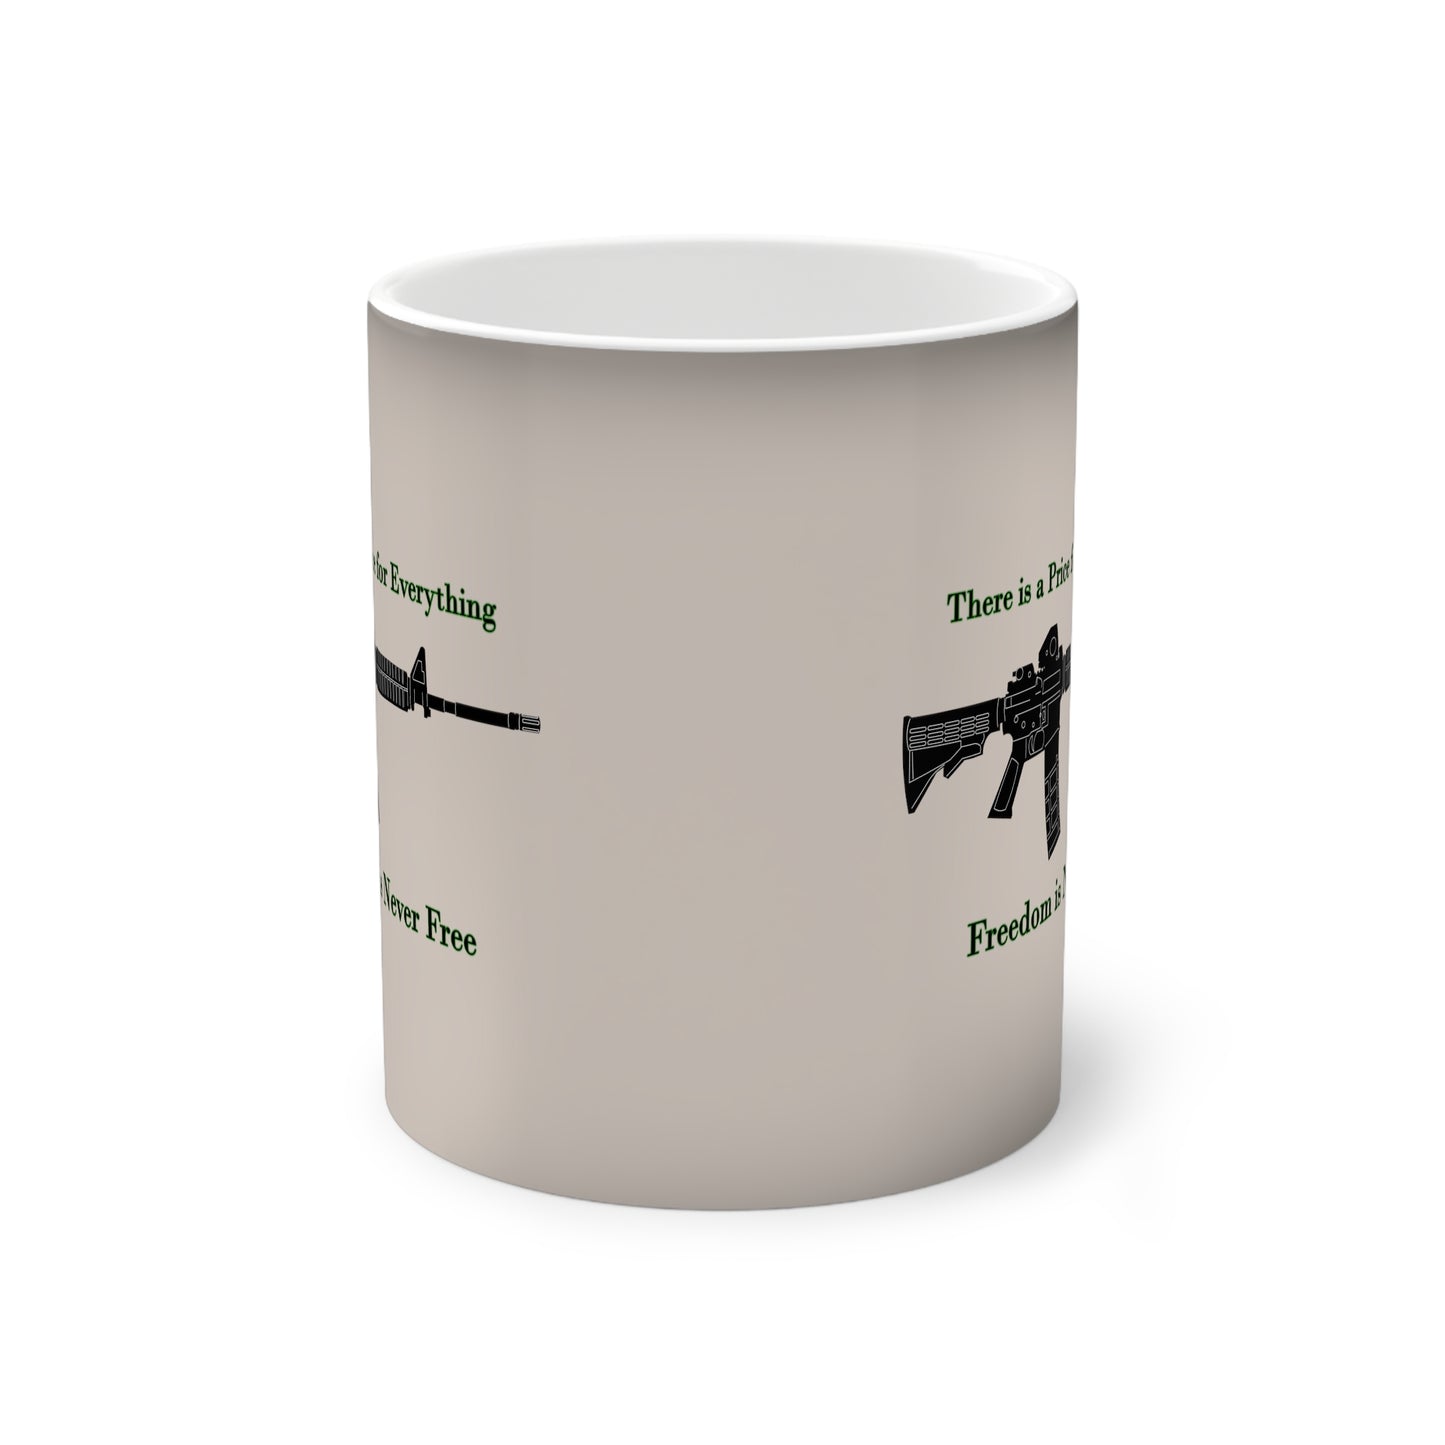 Freedom in Never Free Color-Changing Mug, 11oz